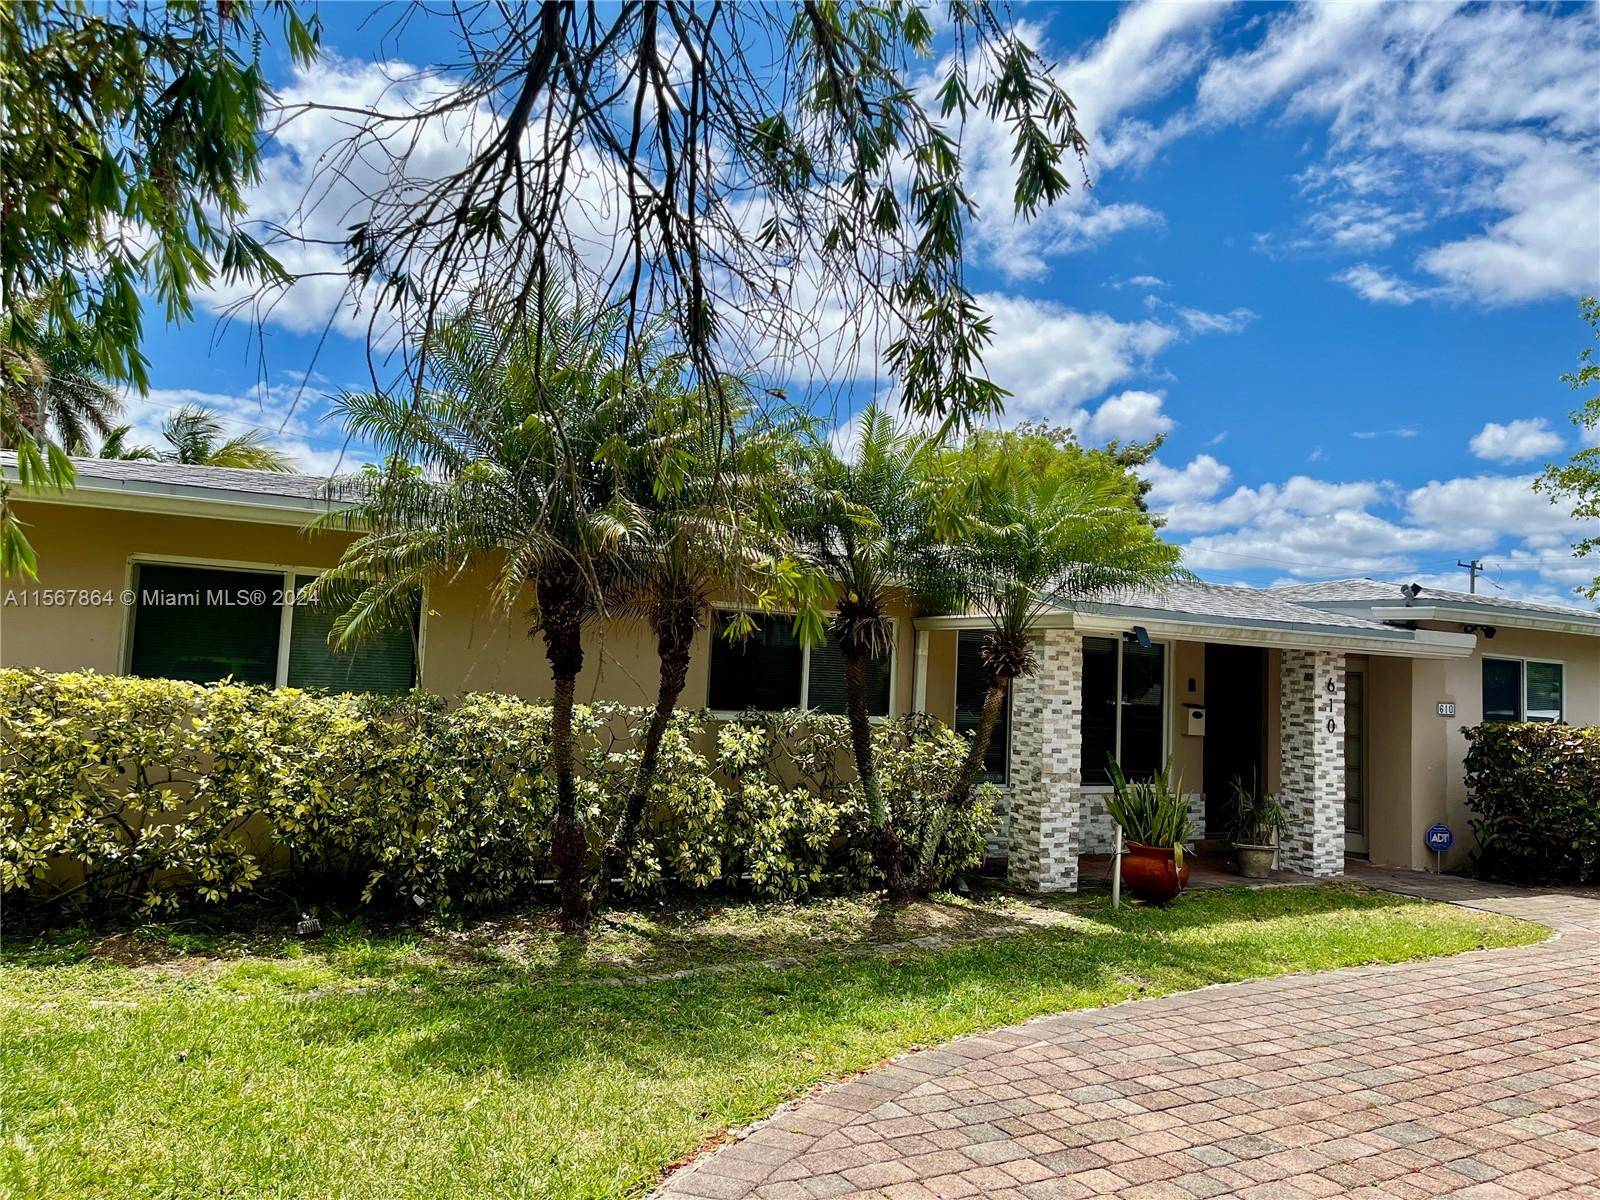 Large, lovely house in historic Dania Beach.